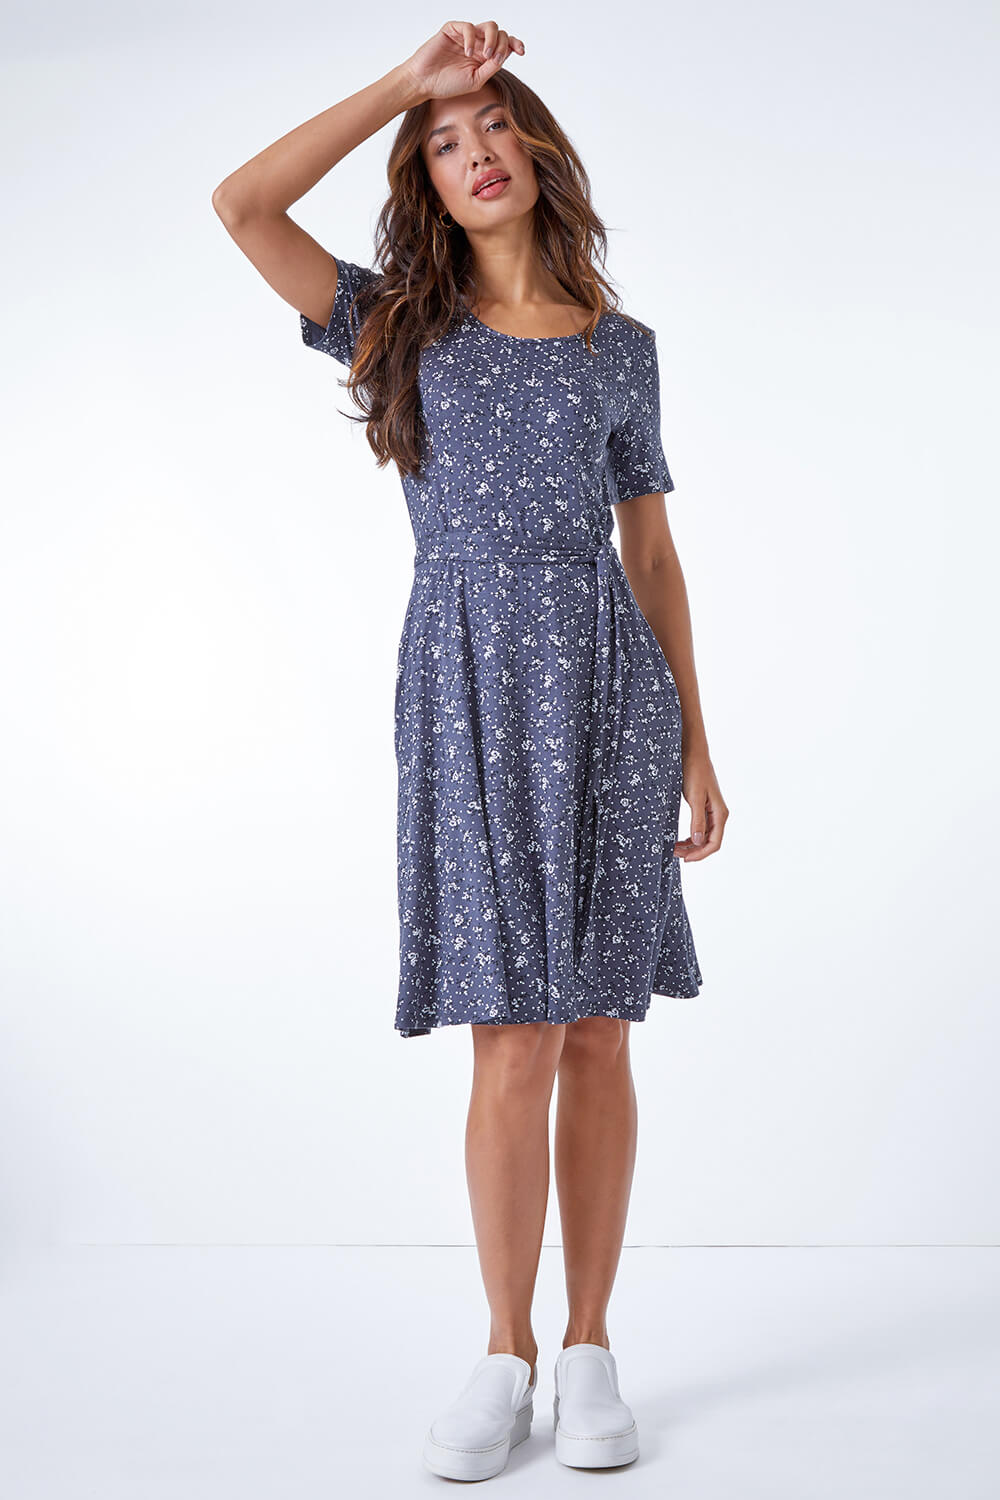 Dark Grey Ditsy Floral Fit & Flare Dress, Image 2 of 5